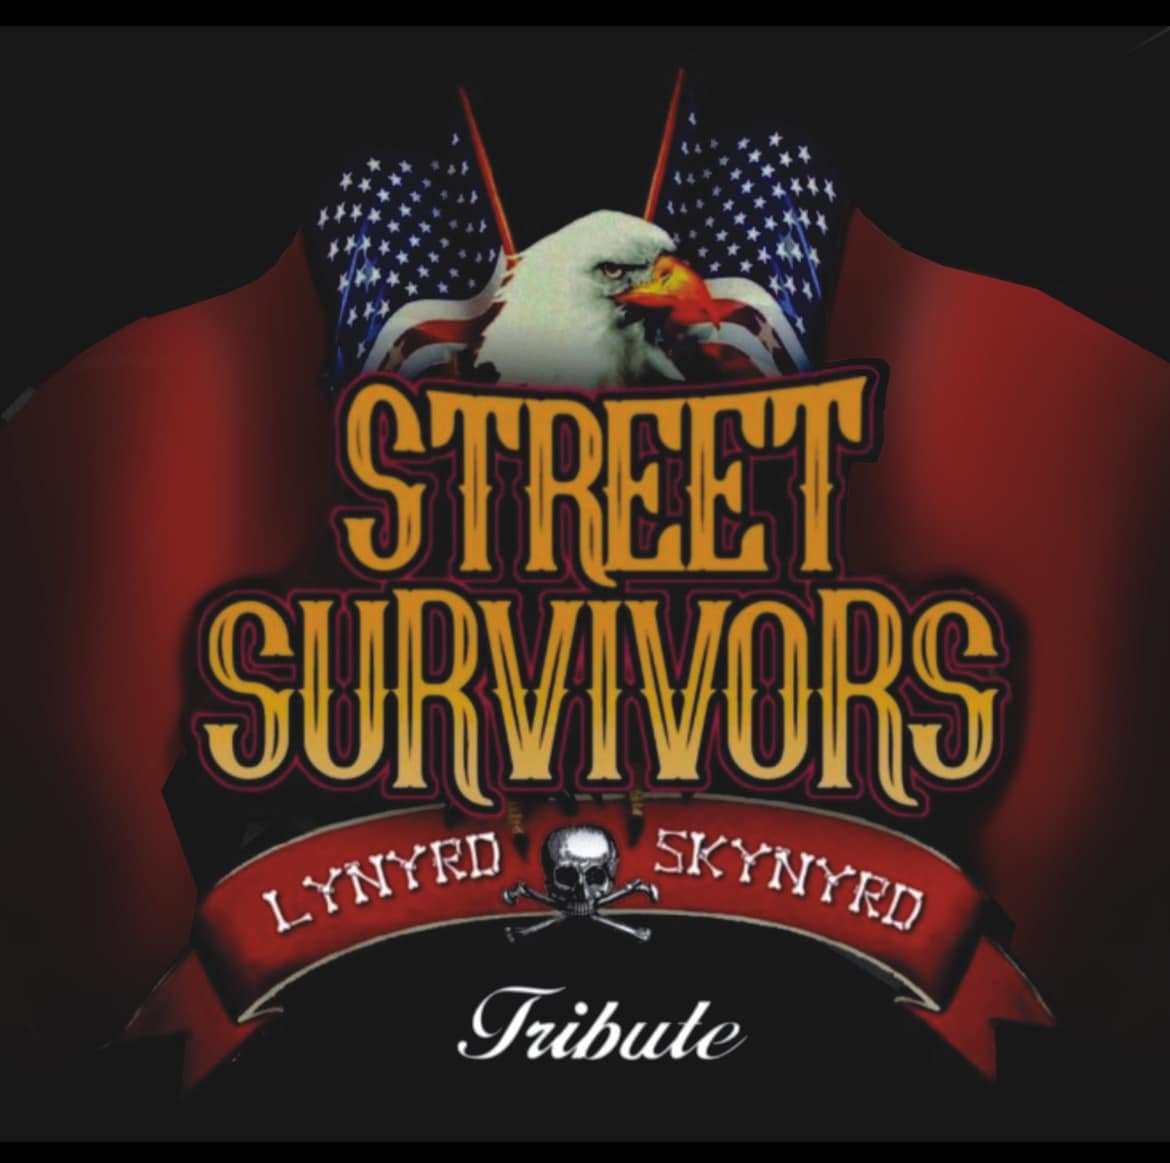 Live at Sessions - Street Survivers Lynyrd Skynyrd Tribute Band